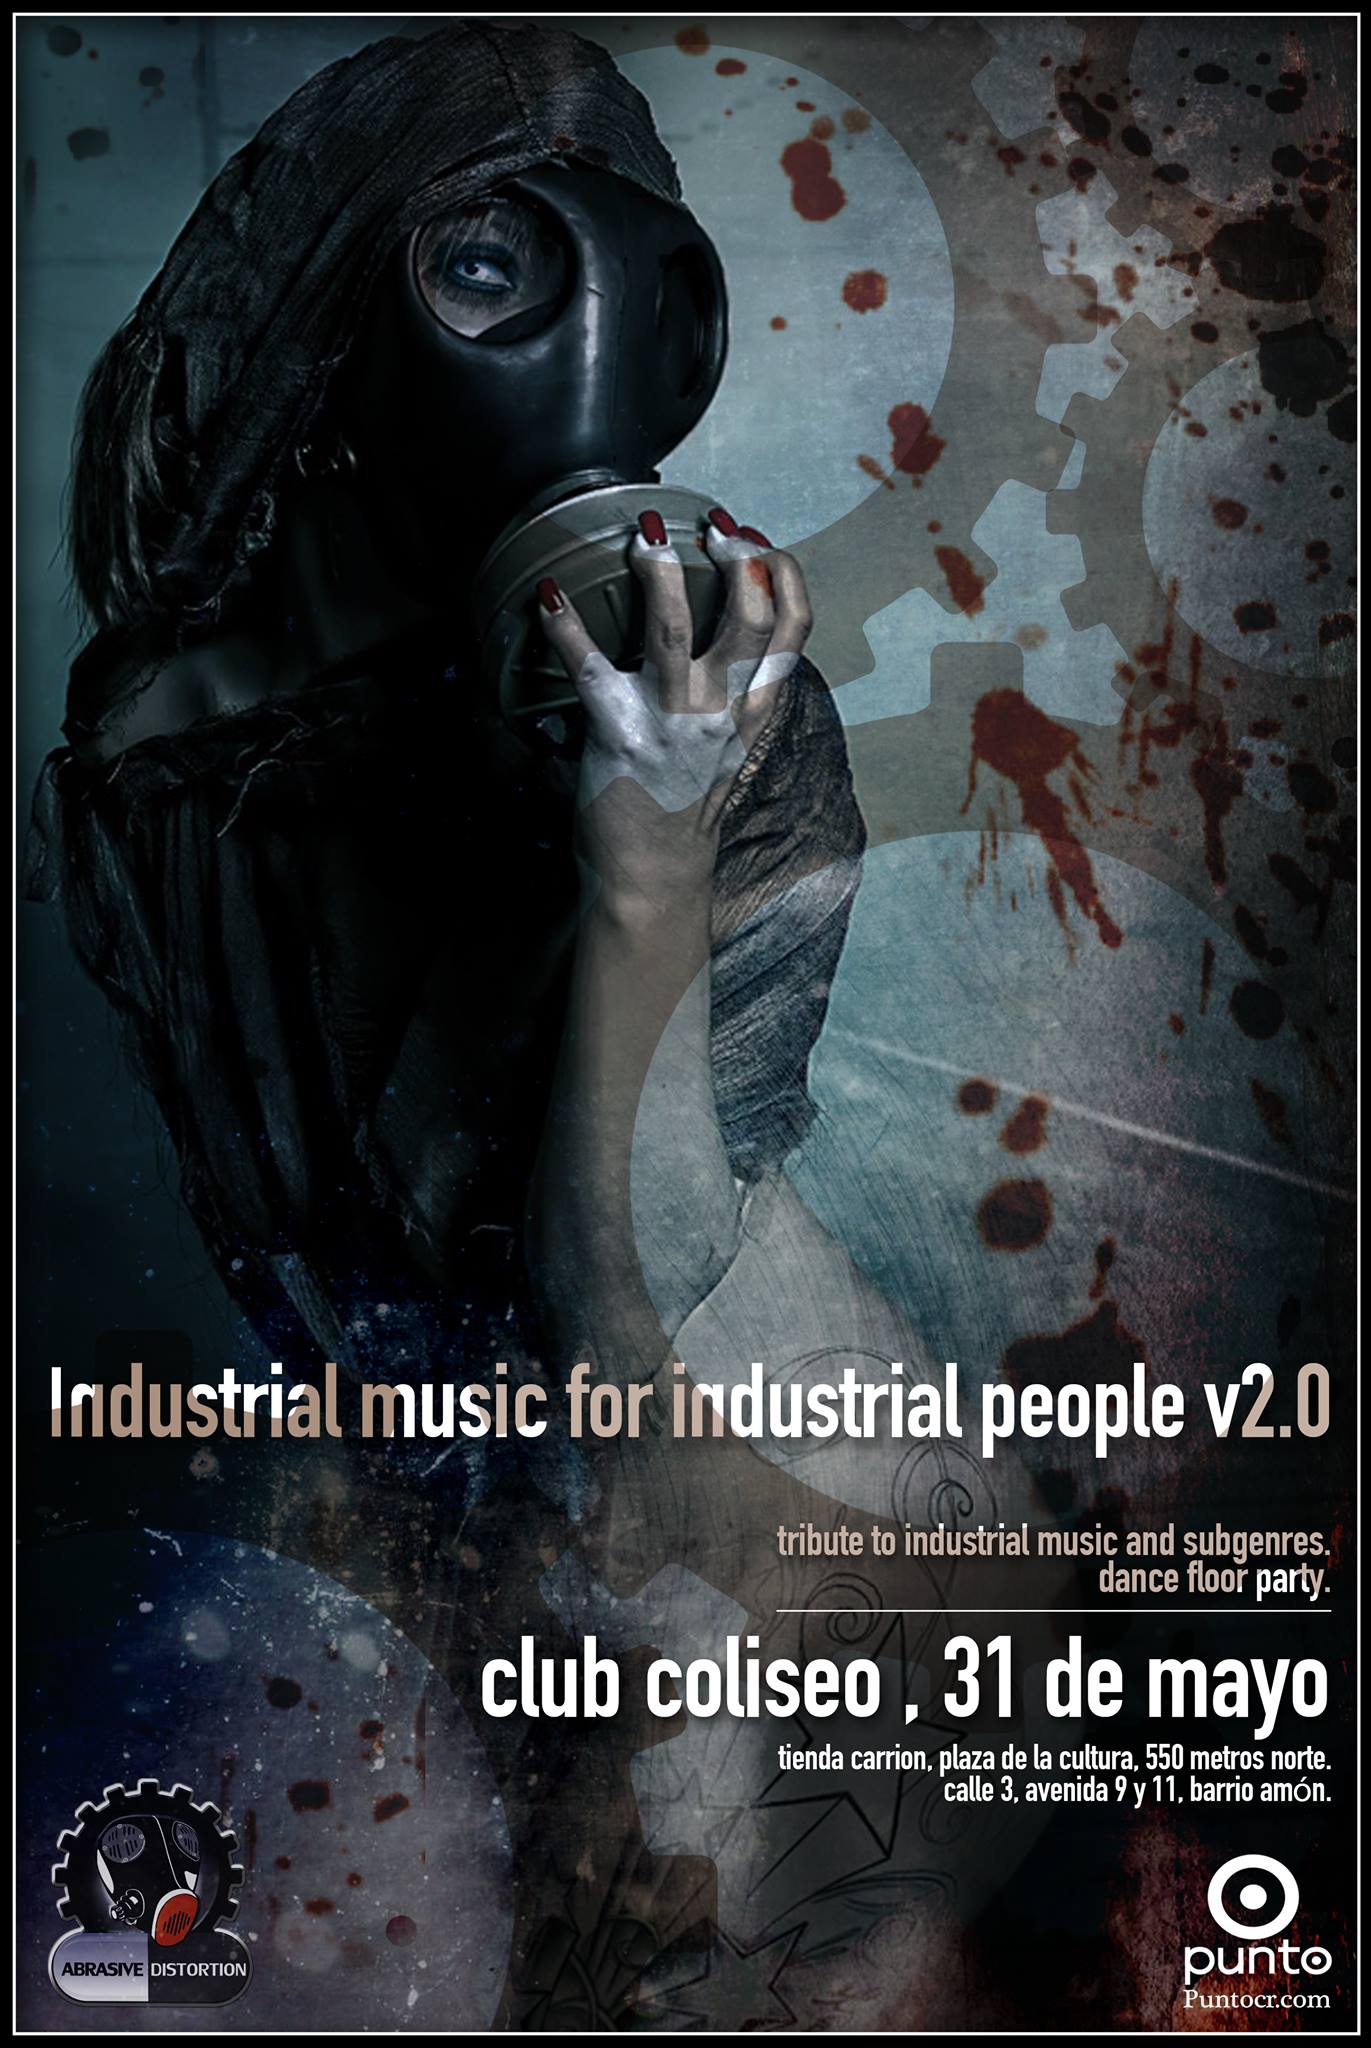 INDUSTRIAL MUSIC FOR INDUSTRIAL PEOPLE v2.0 - 104.7 Radio Hit